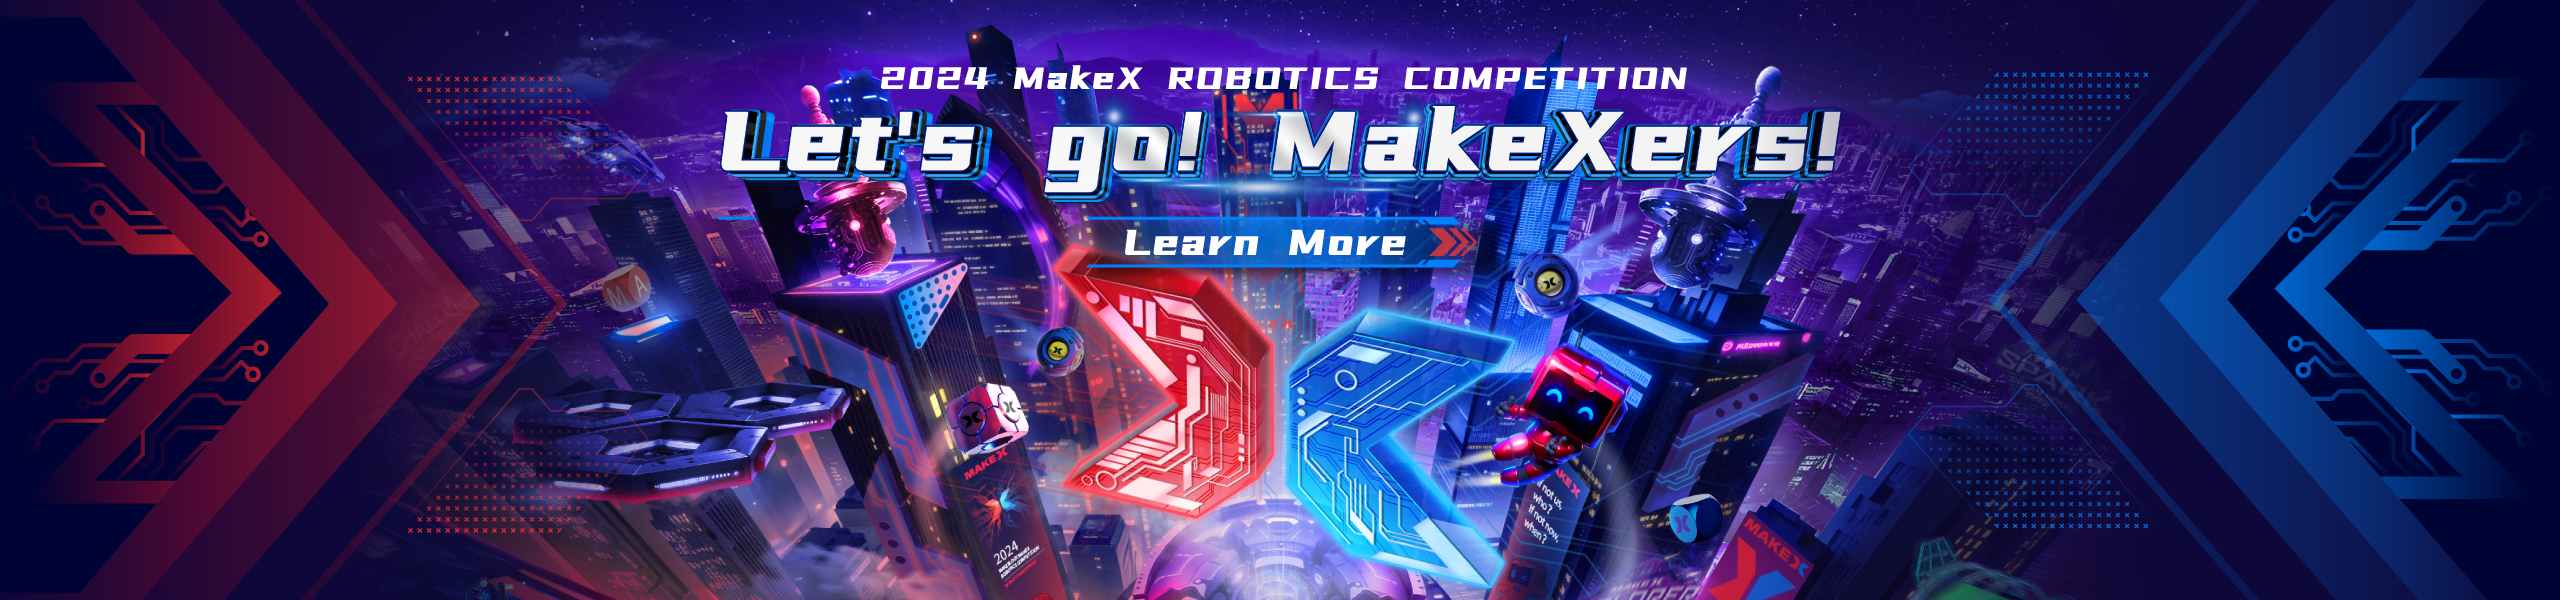 MakeX Competition